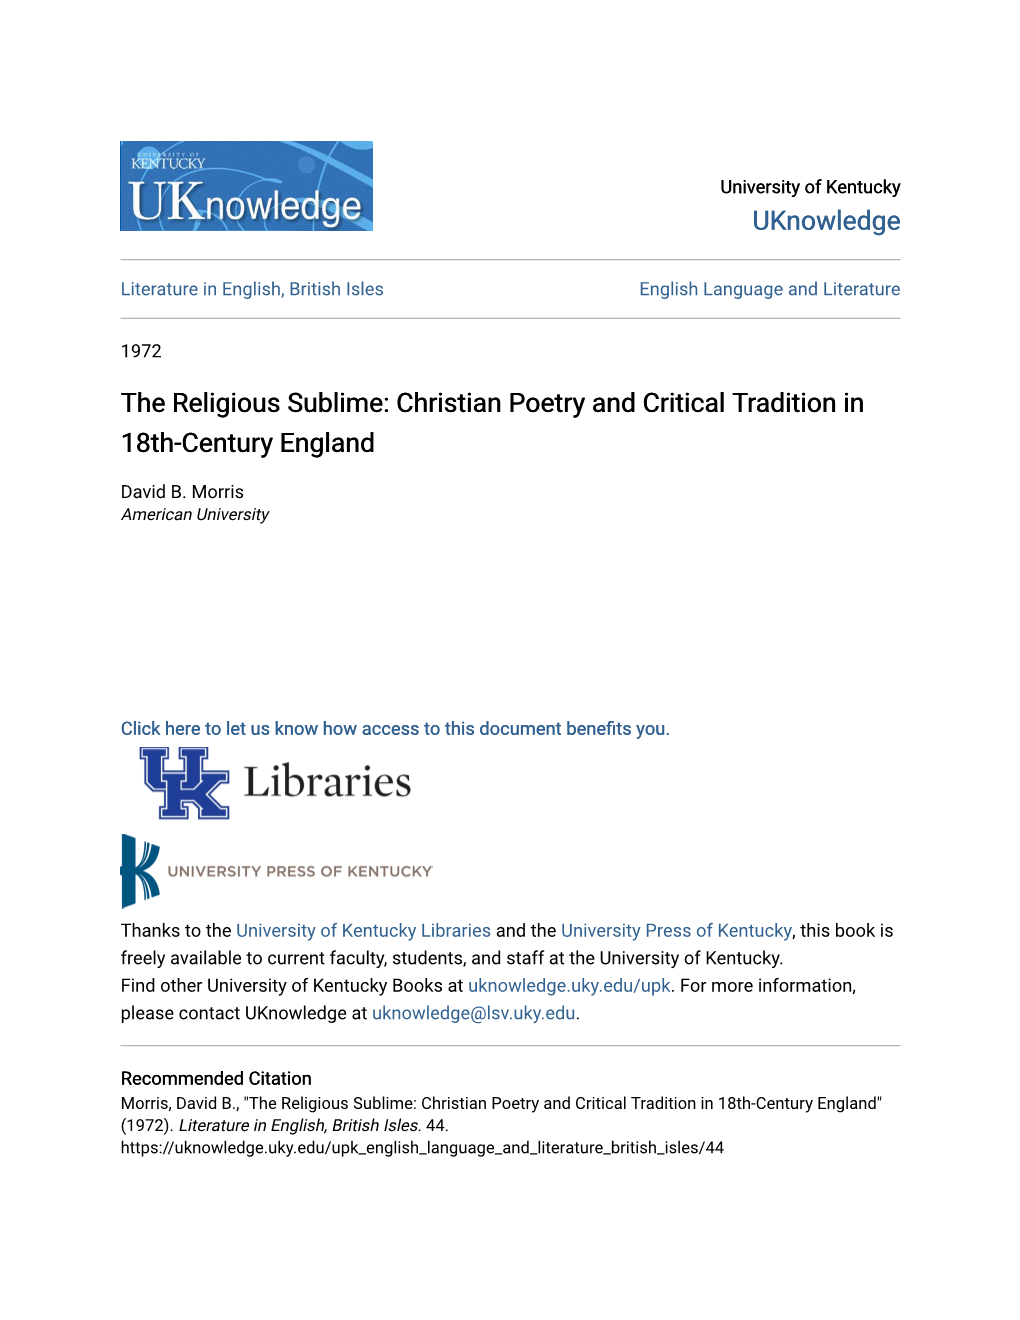 The Religious Sublime: Christian Poetry and Critical Tradition in 18Th-Century England